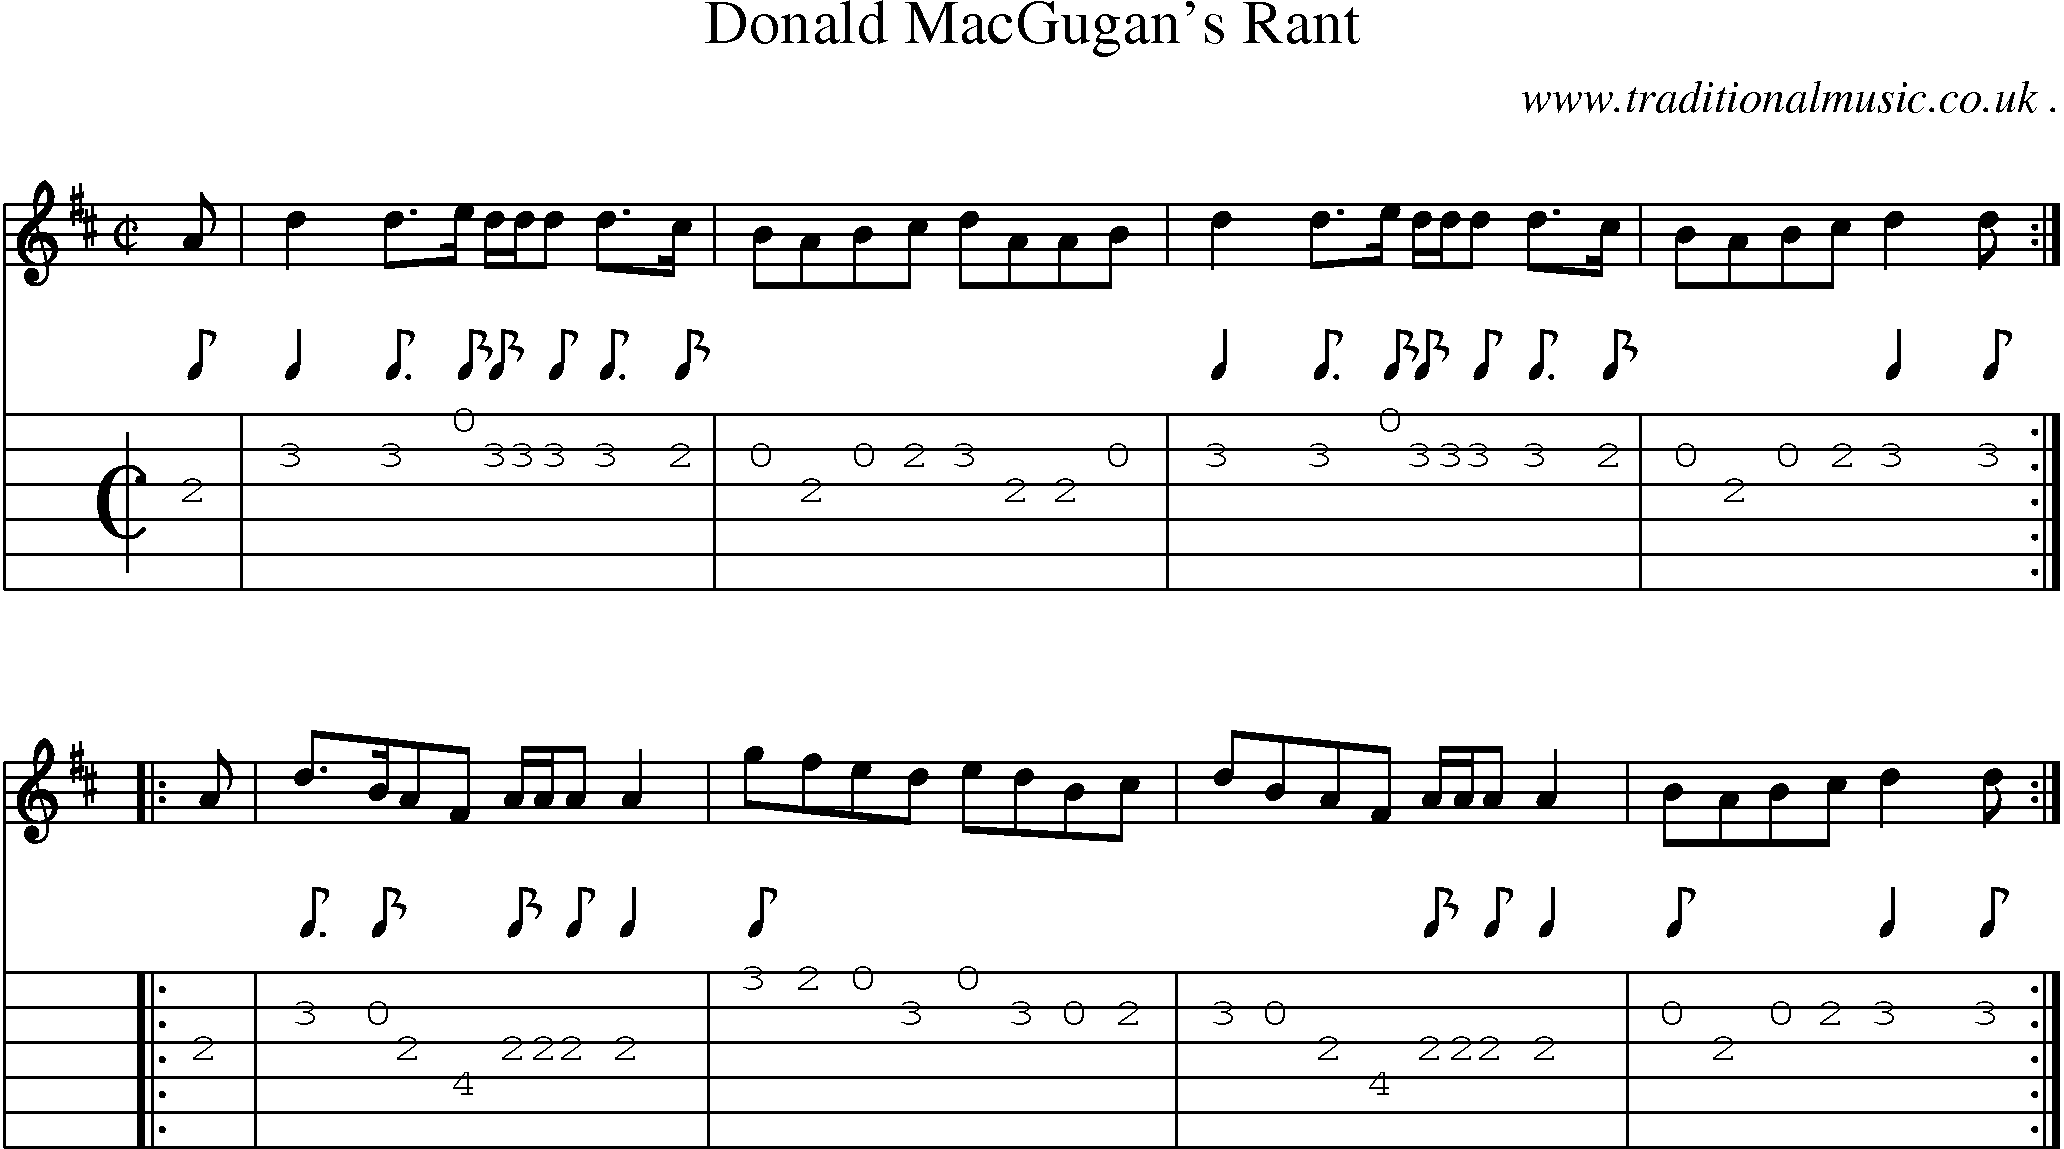 Sheet-music  score, Chords and Guitar Tabs for Donald Macgugans Rant